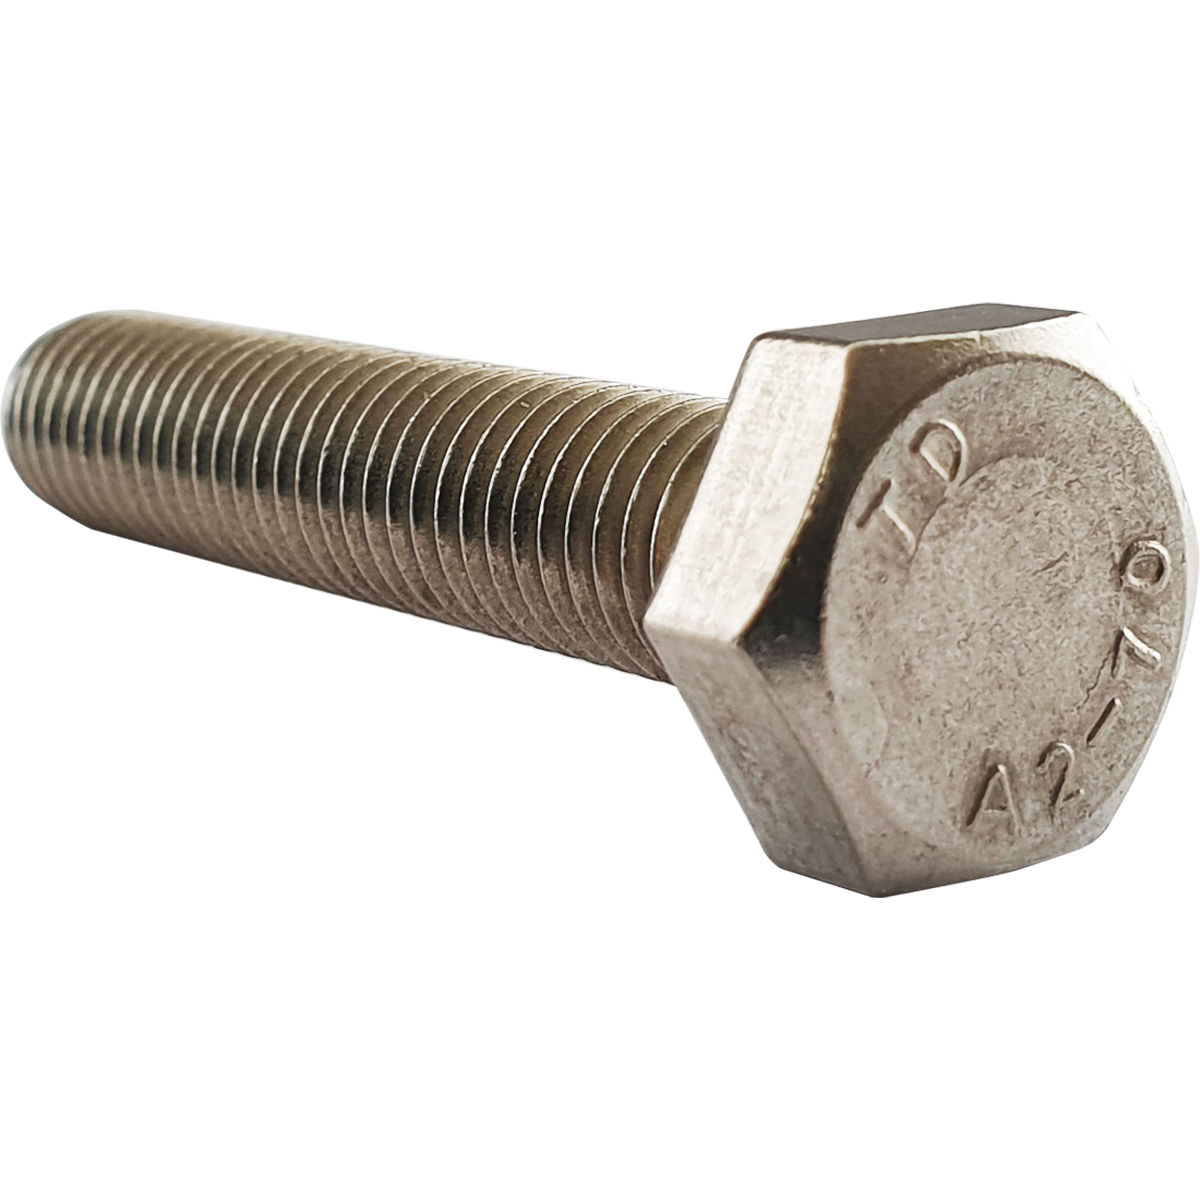 Hex set screws, also known as fully threaded bolts. Corrosion resistant due to being manufactured in A2 stainless steel.